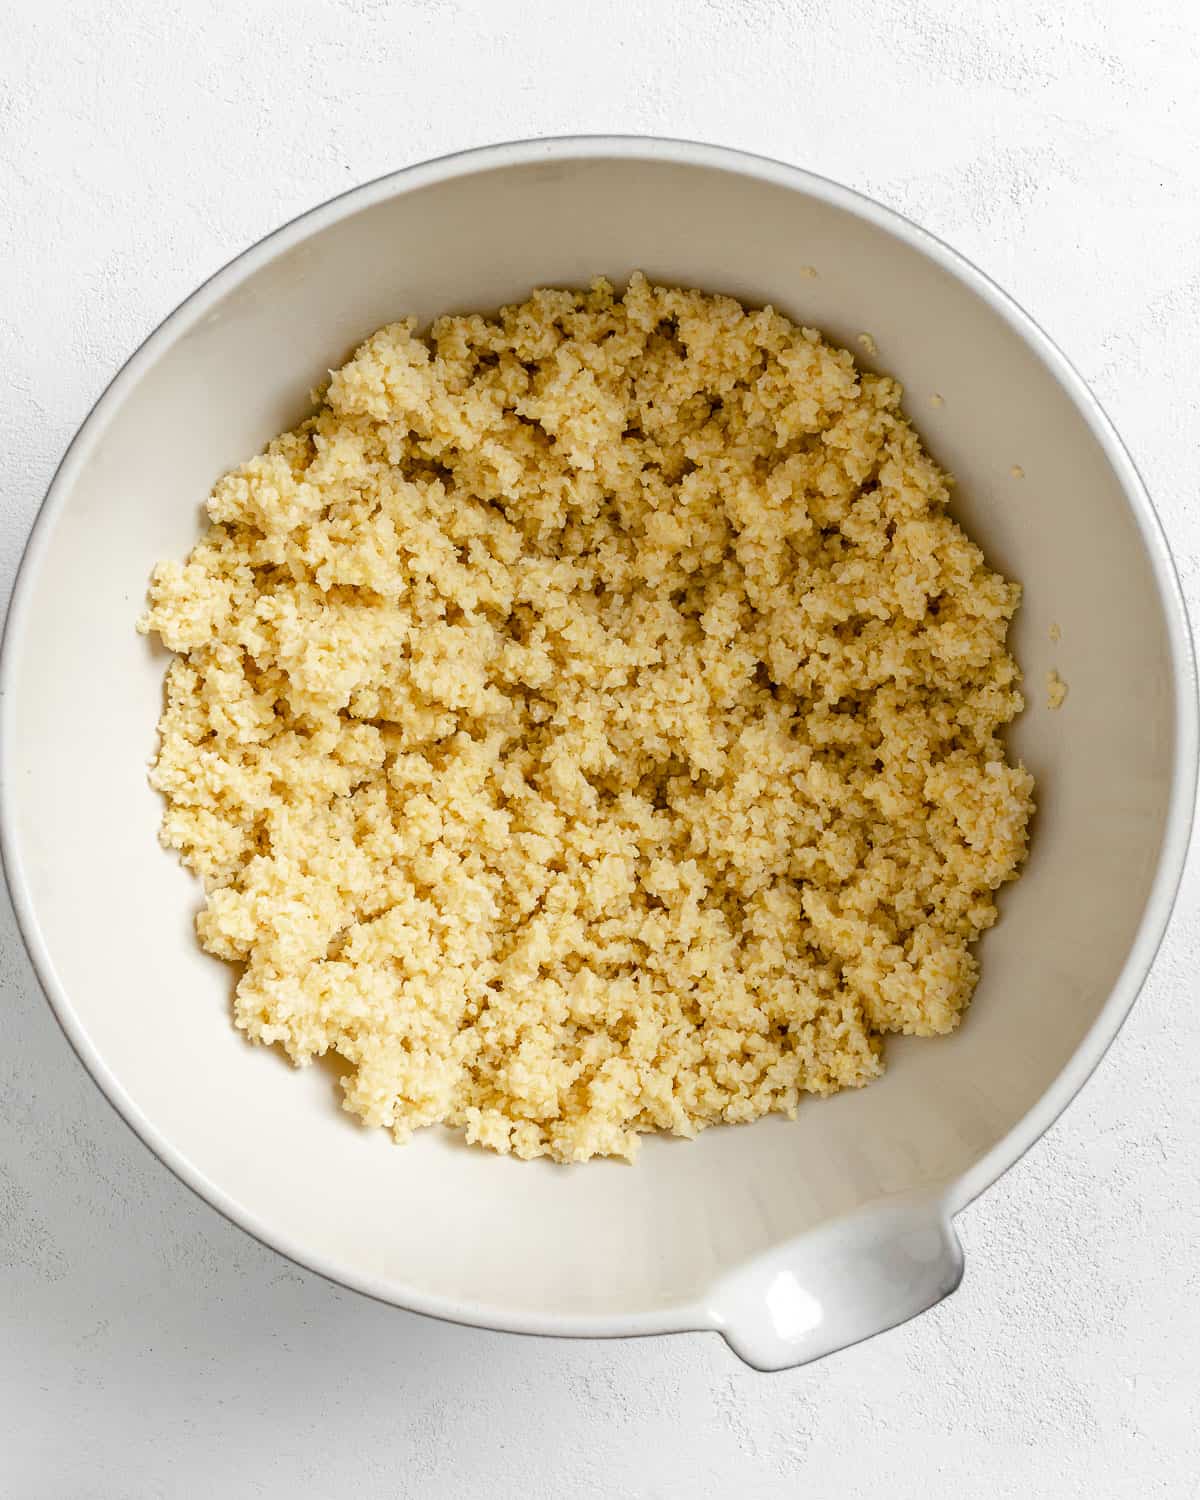 cooked millet in a white bowl against a white background